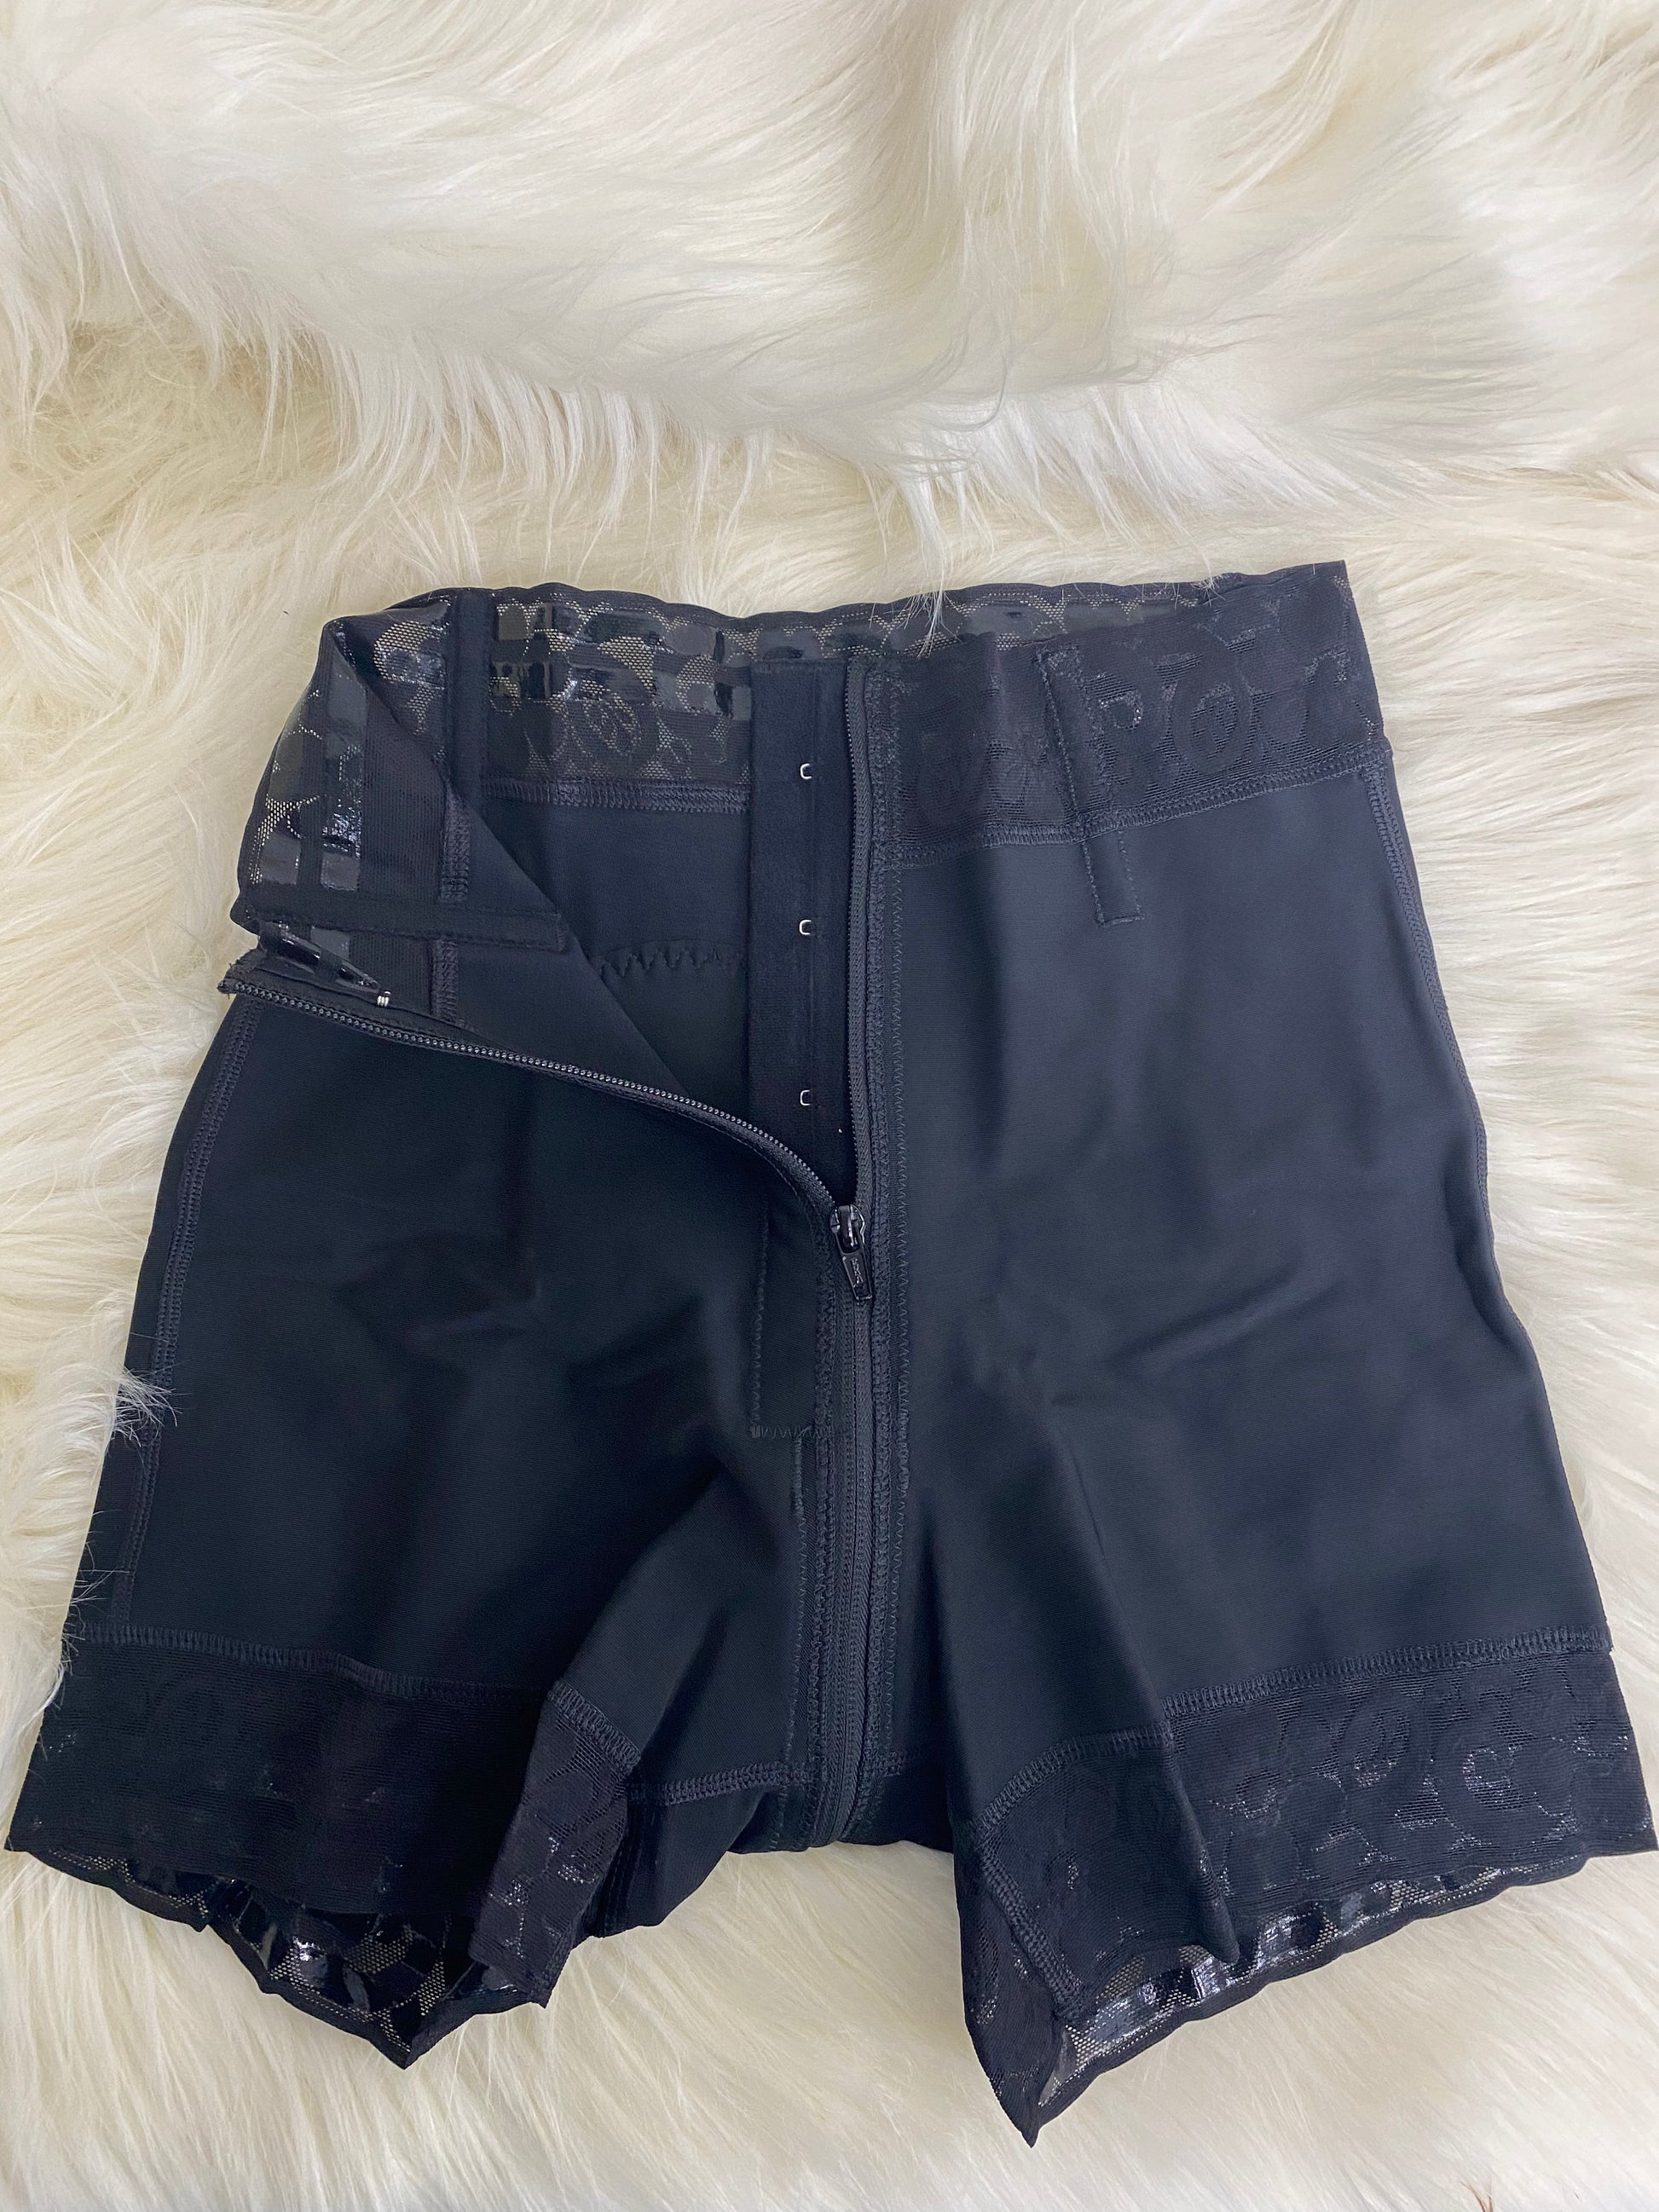 Butt lifter shorts Zipper Colombian Shorts with Buttlifter – Karina Lily  Health and Beauty